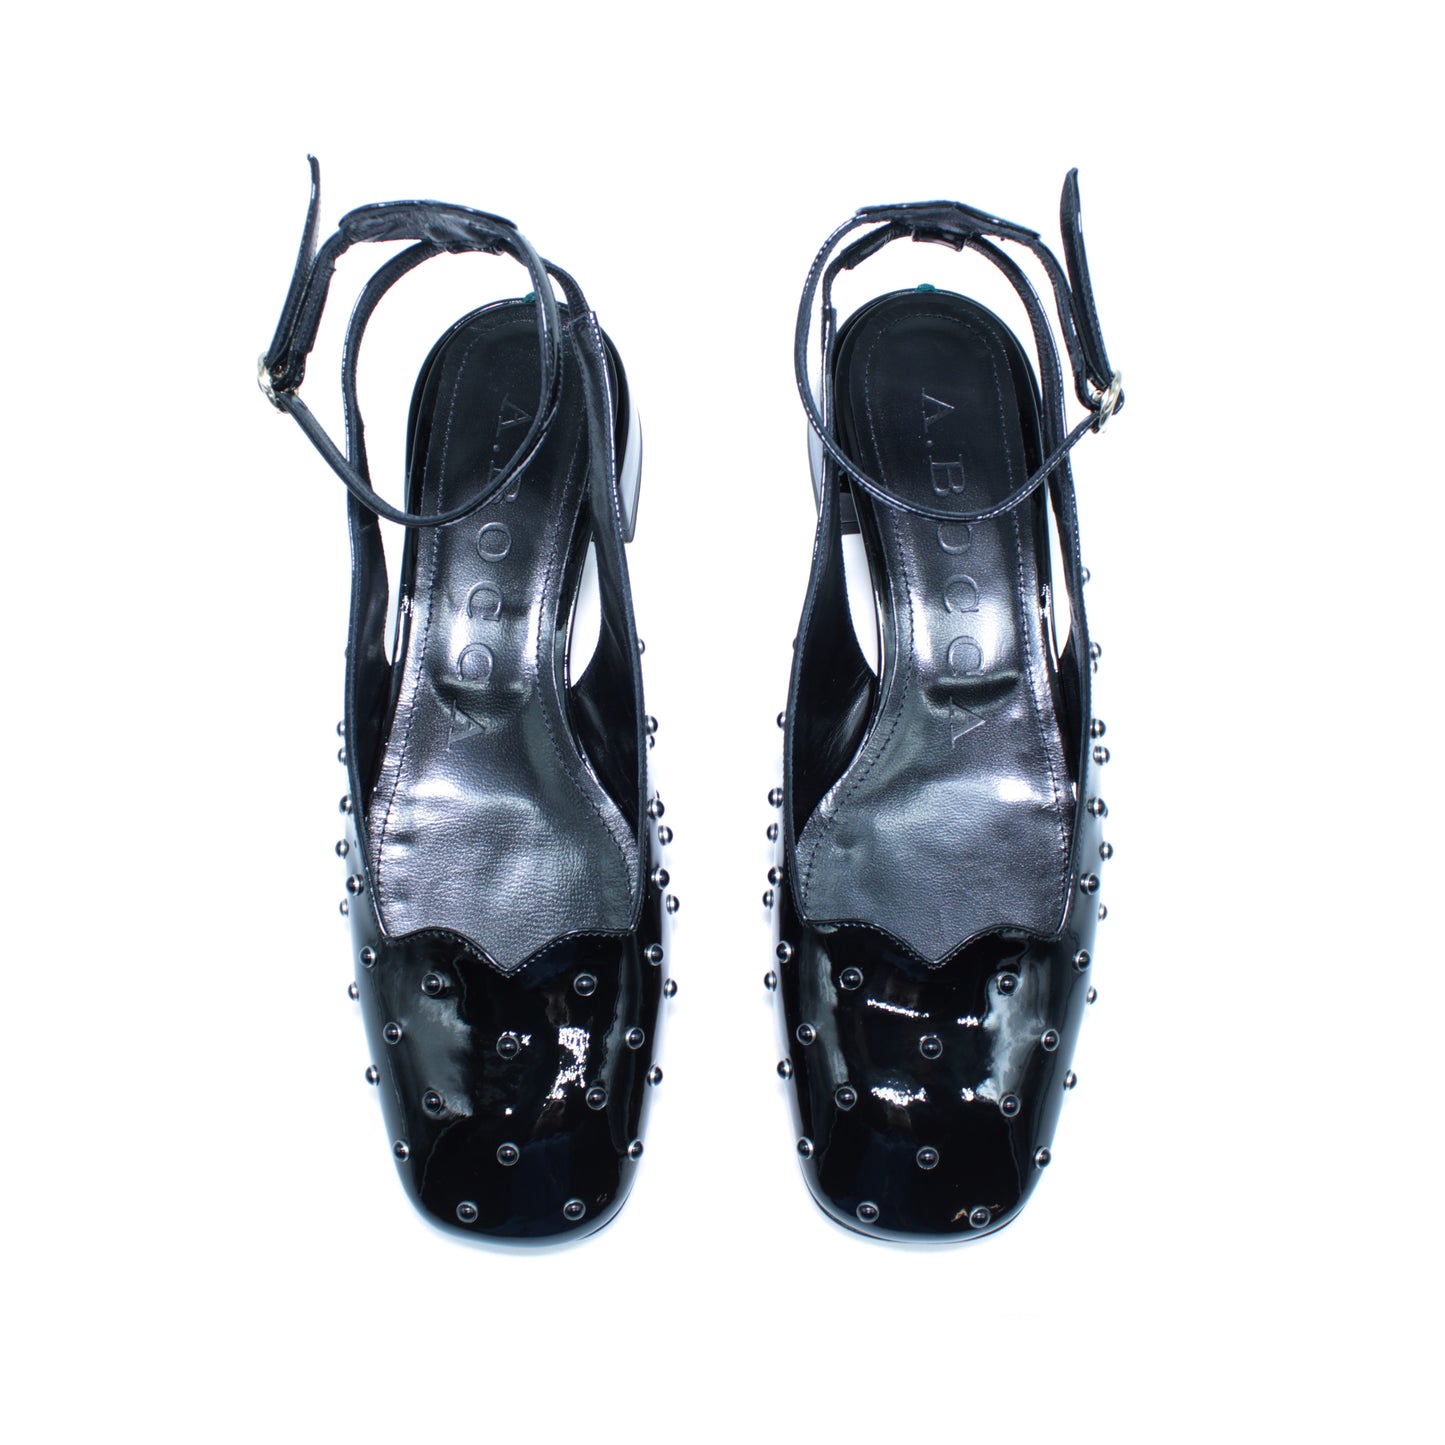 Humi Sling Back in black patent leather